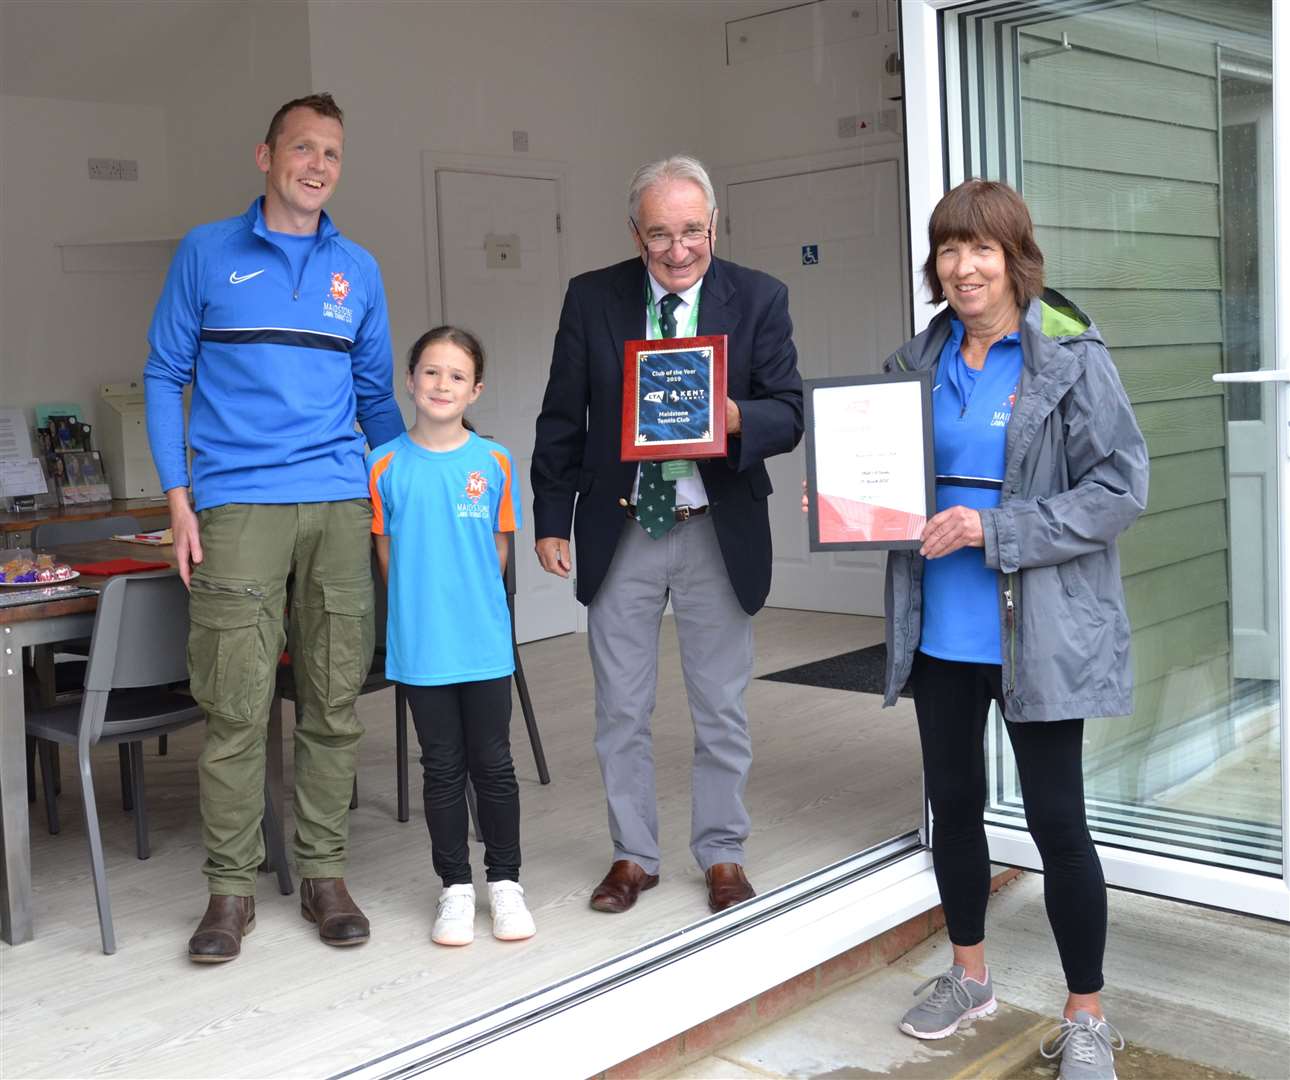 Co-chairs Richard Dawson (left) and Georgina Noakes with junior member Milaya Dawson and John Ratcliffe who opened the clubhouse